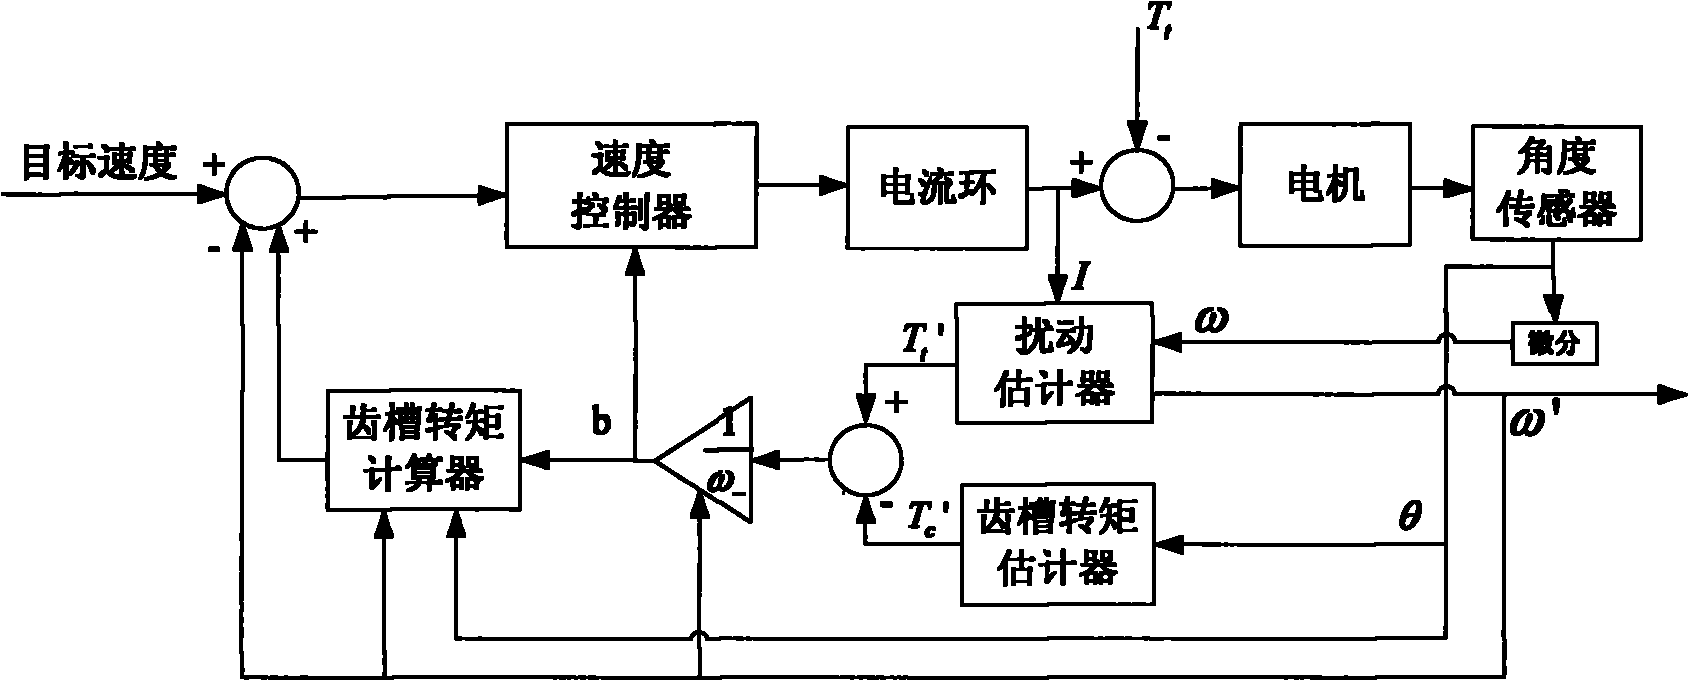 Control system for low-speed running of permanent magnet motor